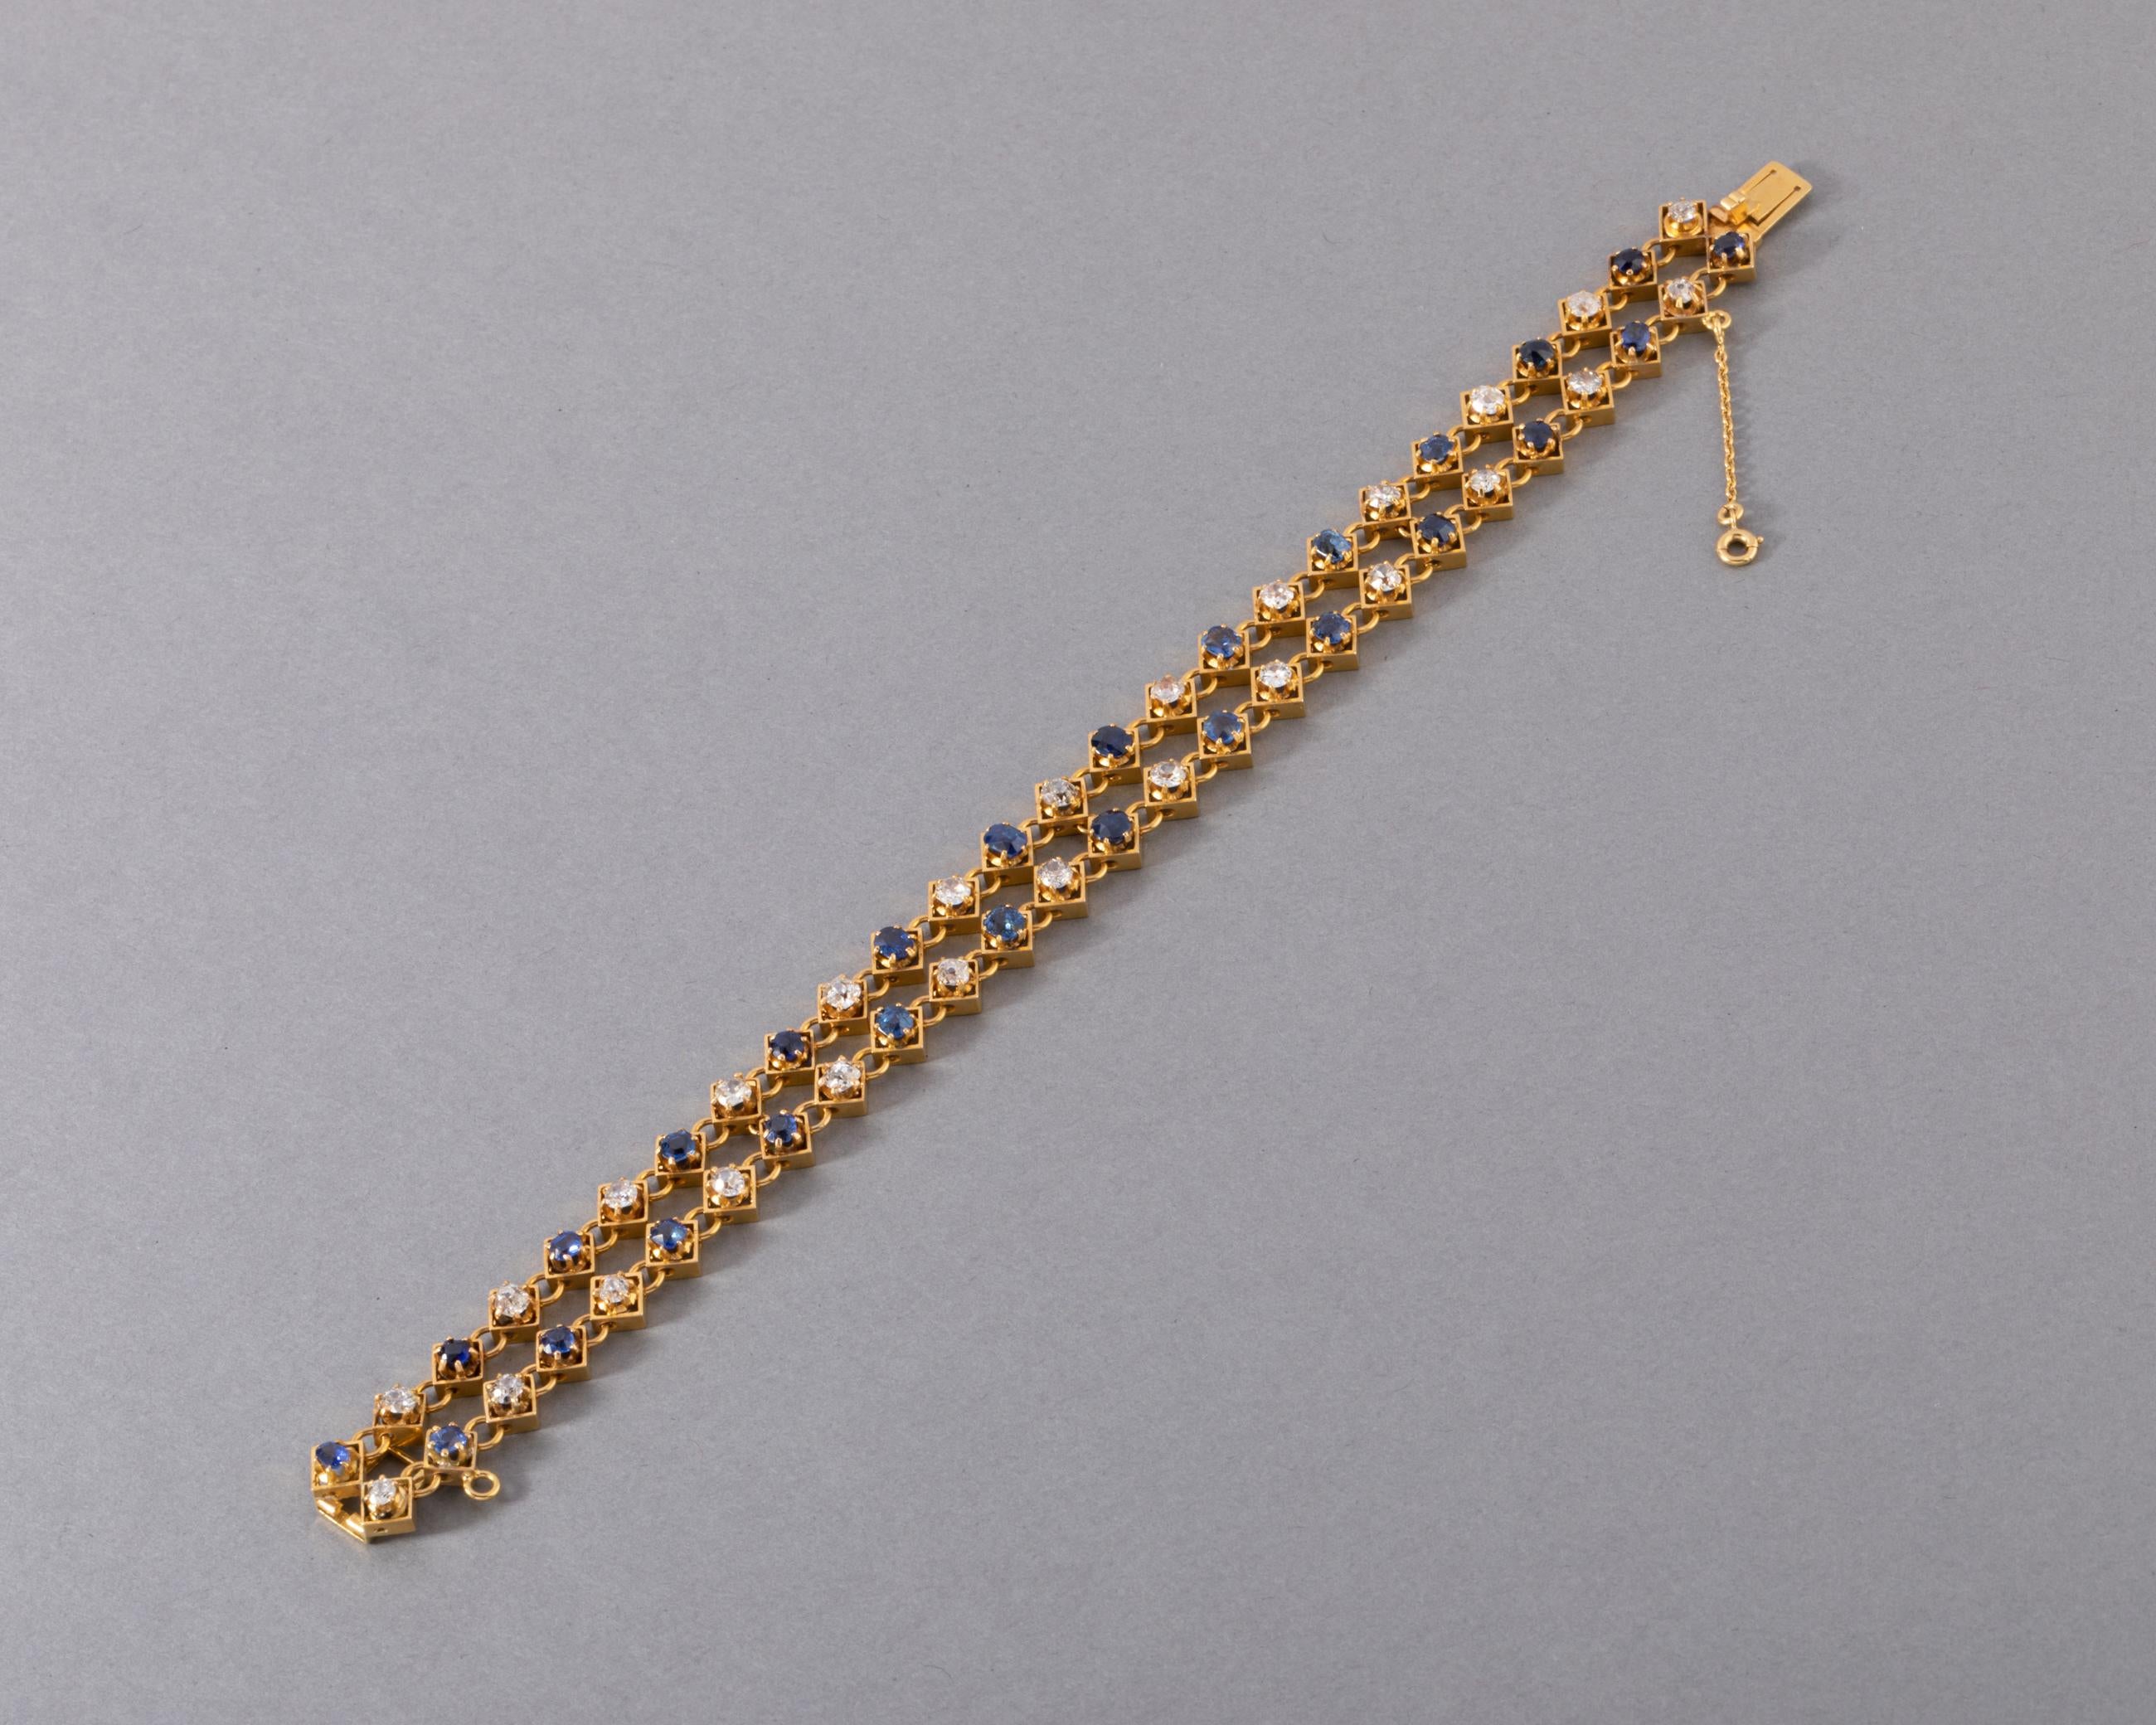 One very lovely antique bracelet, made in France circa 1900.
Made in yellow gold 18k and set with approximately 2.50 carats diamonds and 3 carats sapphires.
The length is 18.5 cm and the with 12mm.
Total weight: 23.50 grams